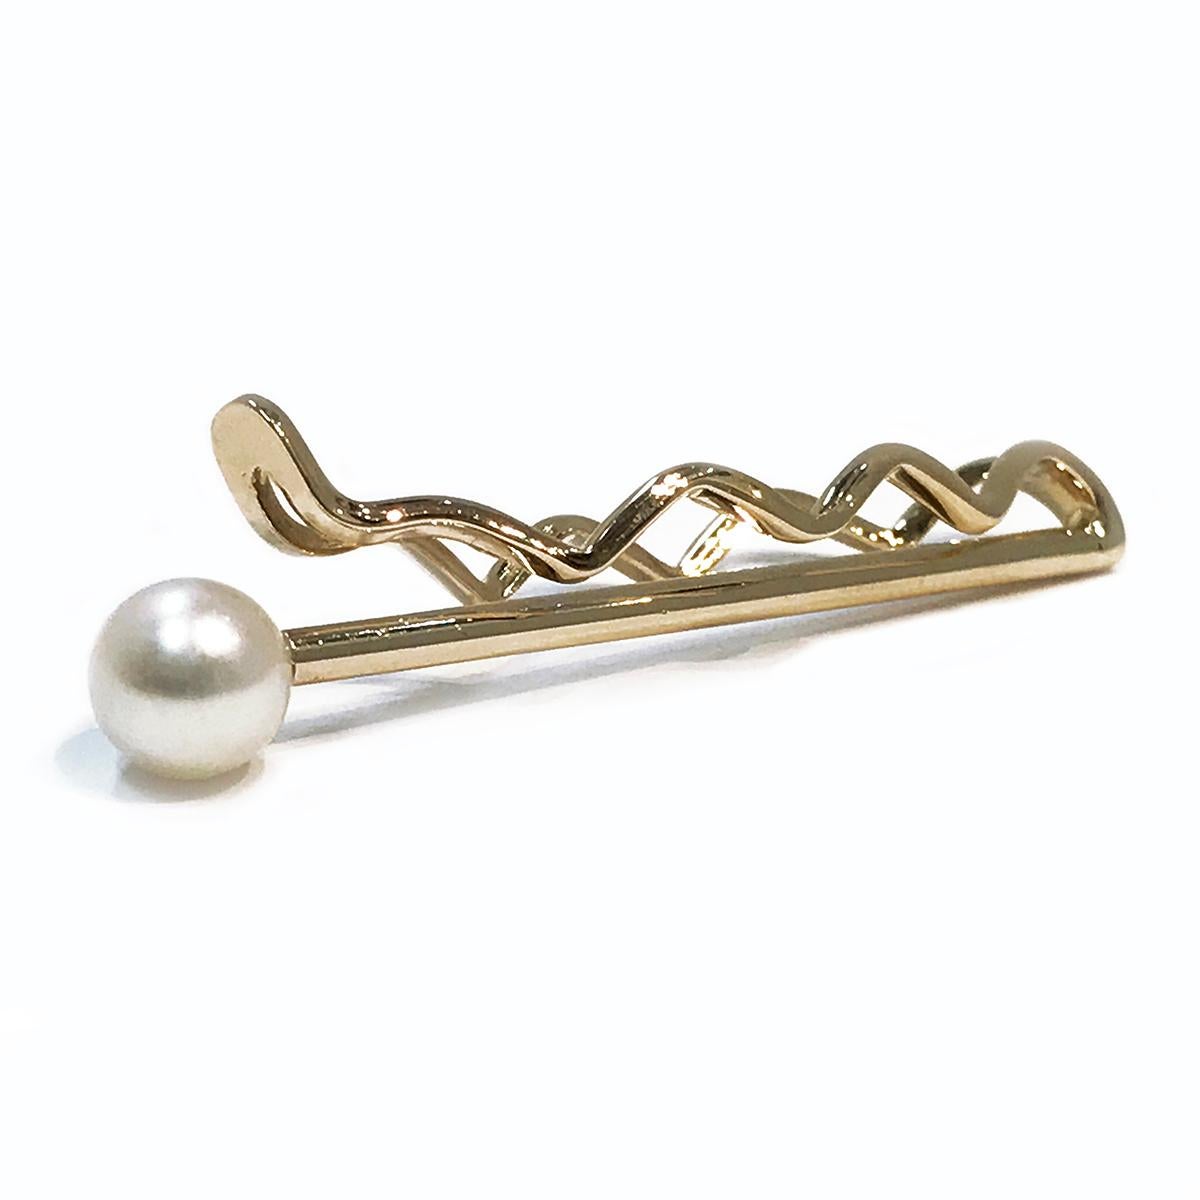 Vintage 14k Yellow Gold Tie Clip with Single Pearl. The Pearl is 6.67mm. The back of the tie clip has a unique zig-zag design. The total weight of the tie tack is 3 grams.